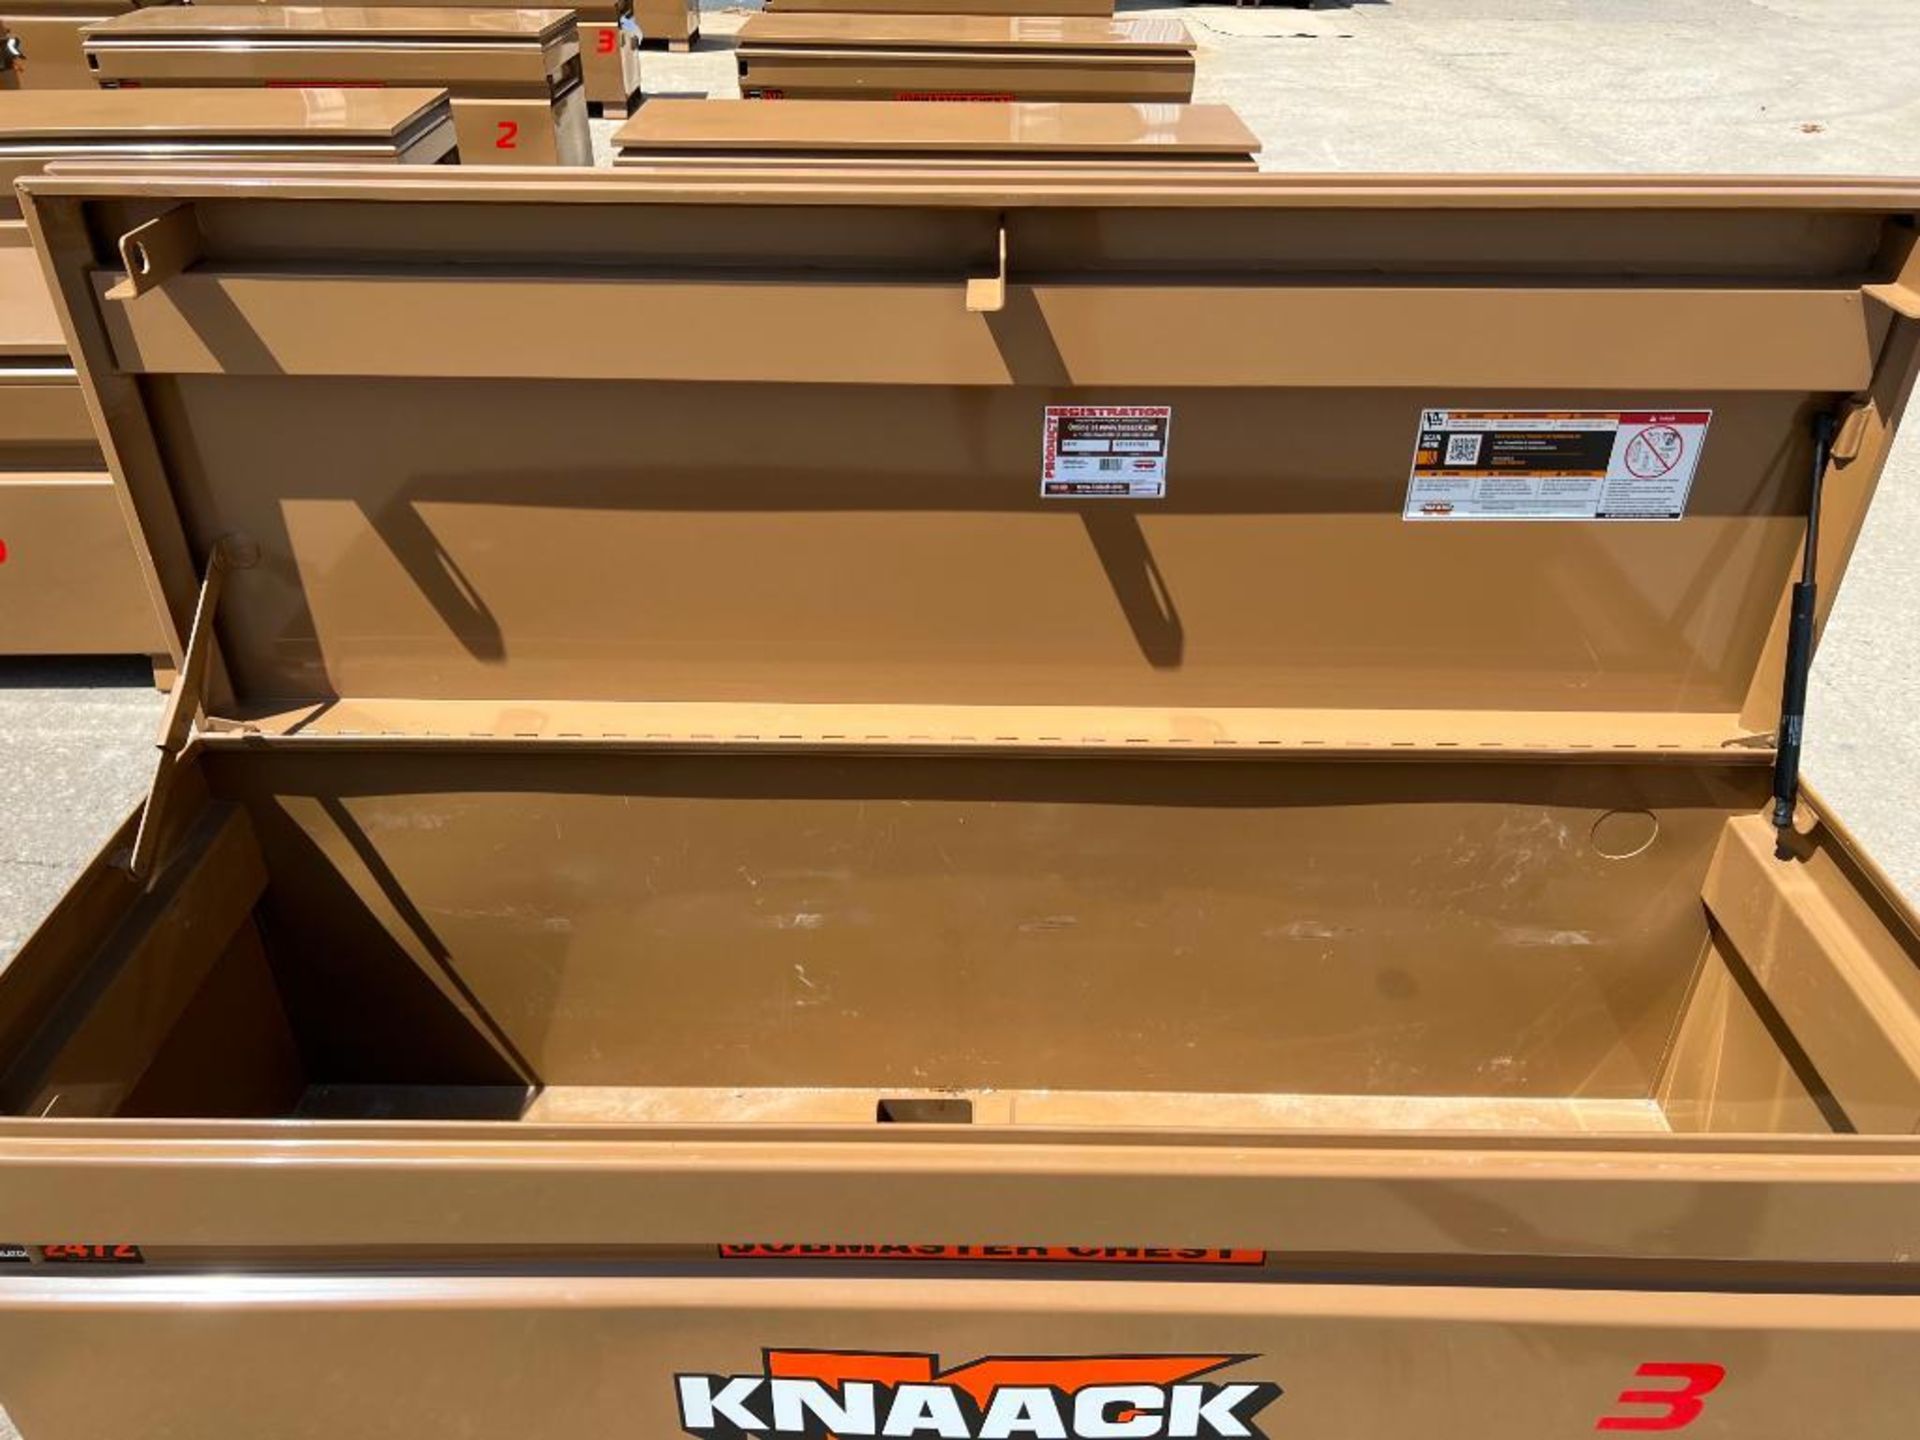 Knaack Jobmaster Chest, Model #2472, Serial #2211017523. Located in Mt. Pleasant, IA - Image 3 of 3